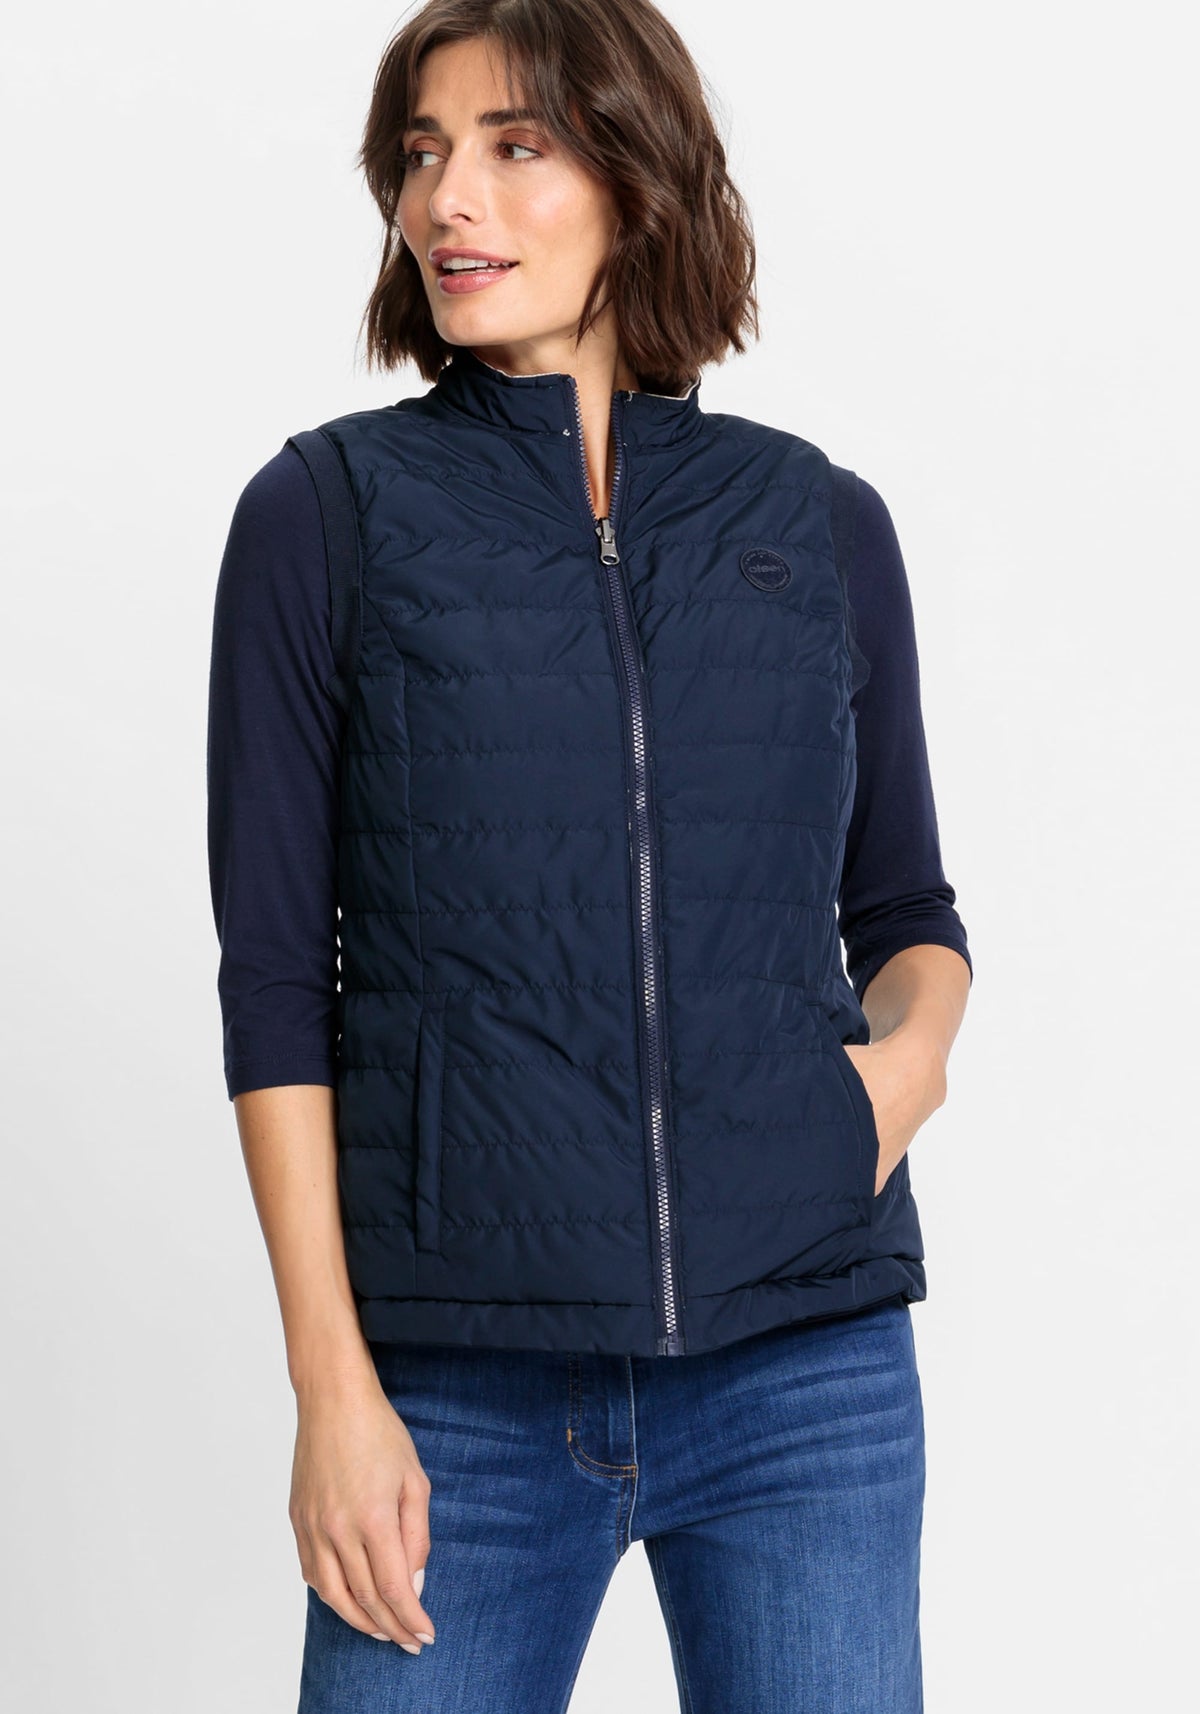 2-in-1 Reversible Quilted Vest containing REPREVE®